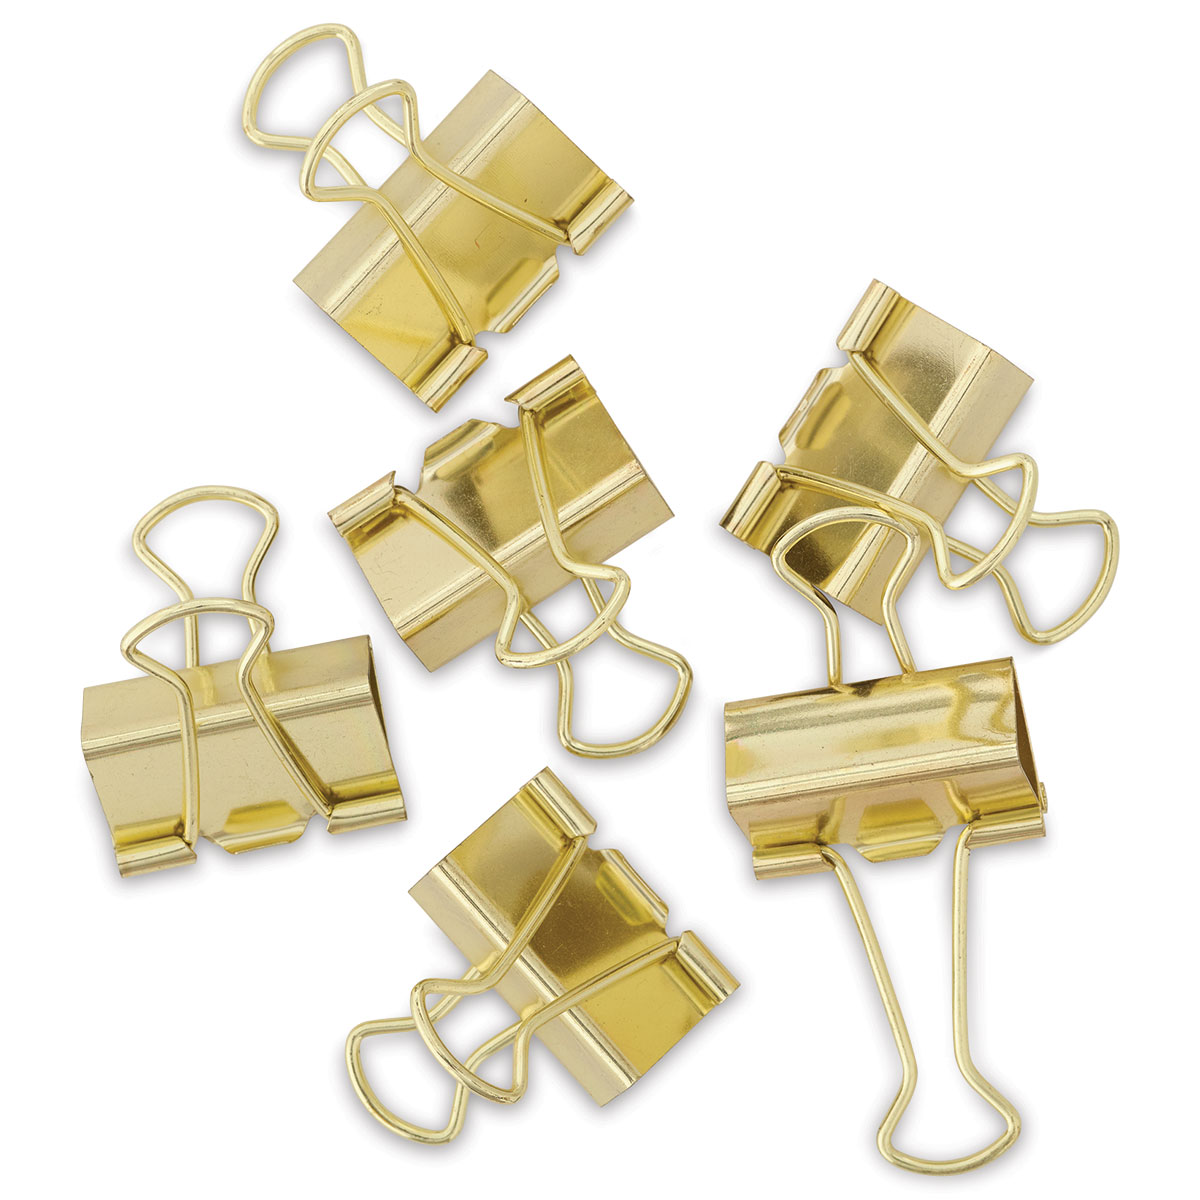 Gold Binder Clips Coideal 10 Pack 2 Inch Stainless Steel Large BPRC-Gold-10P 